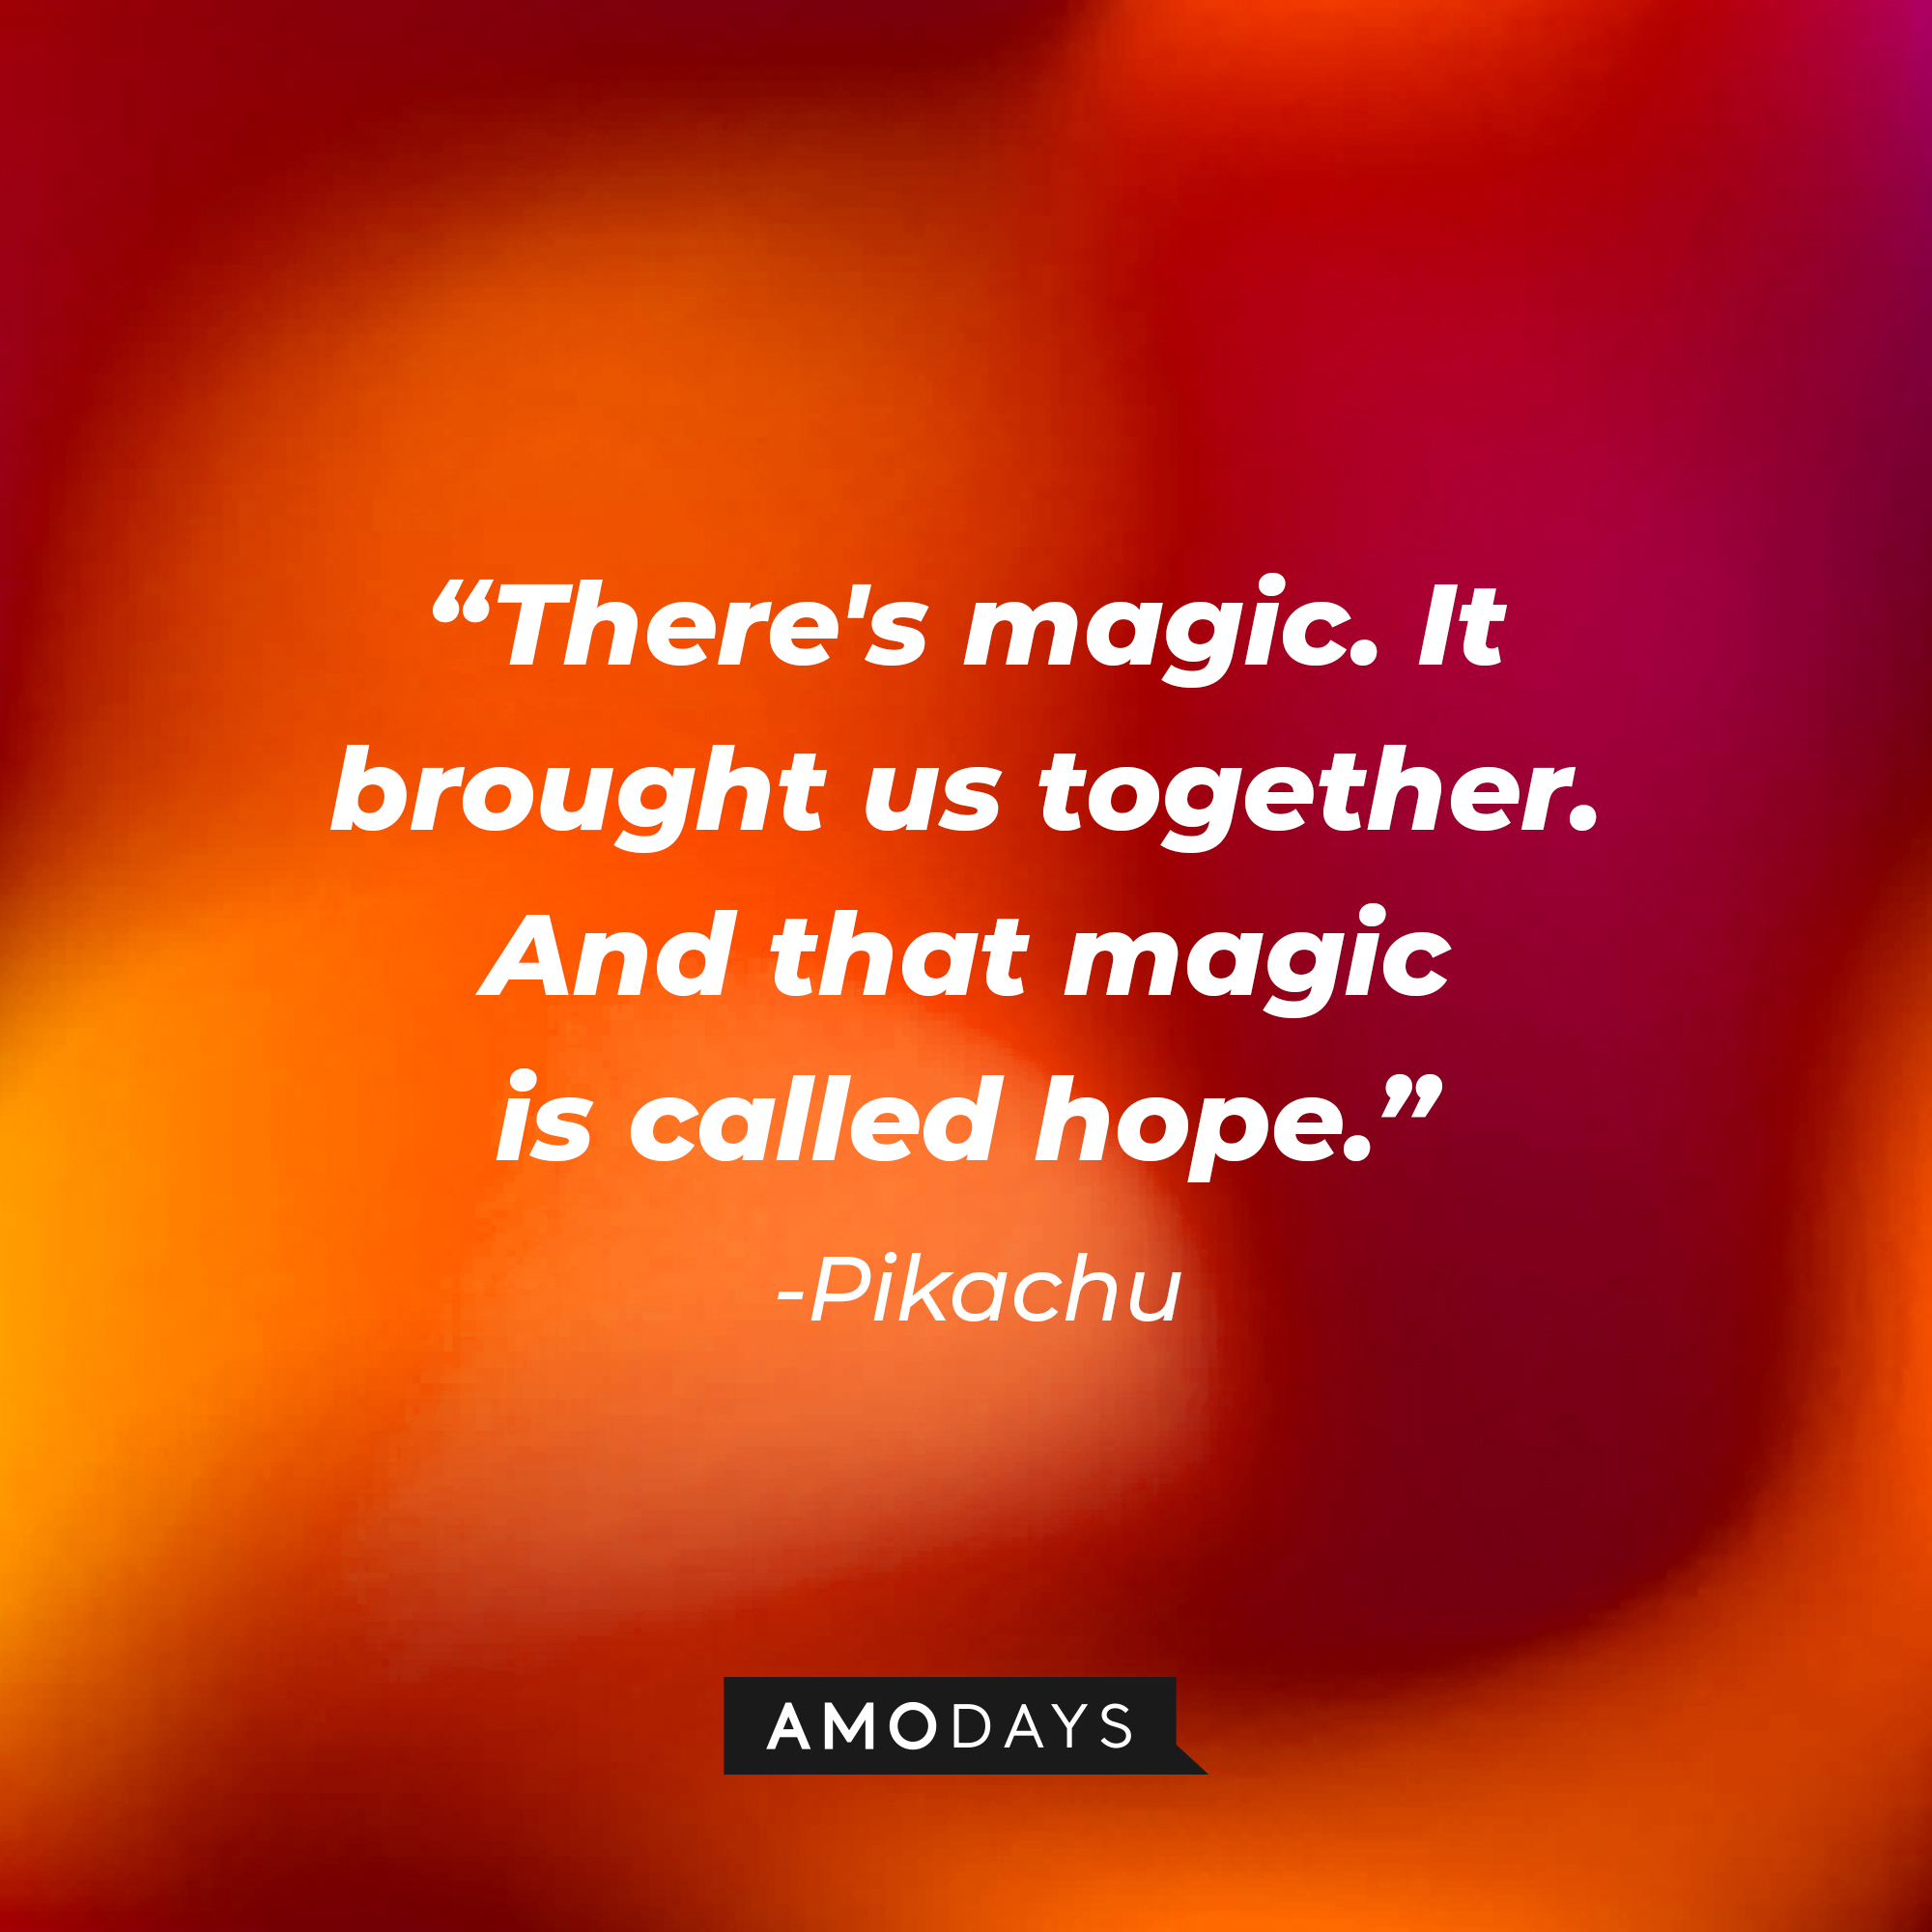 Pikachu's quote: "There's magic. It brought us together. And that magic is called hope." | Source: AmoDays